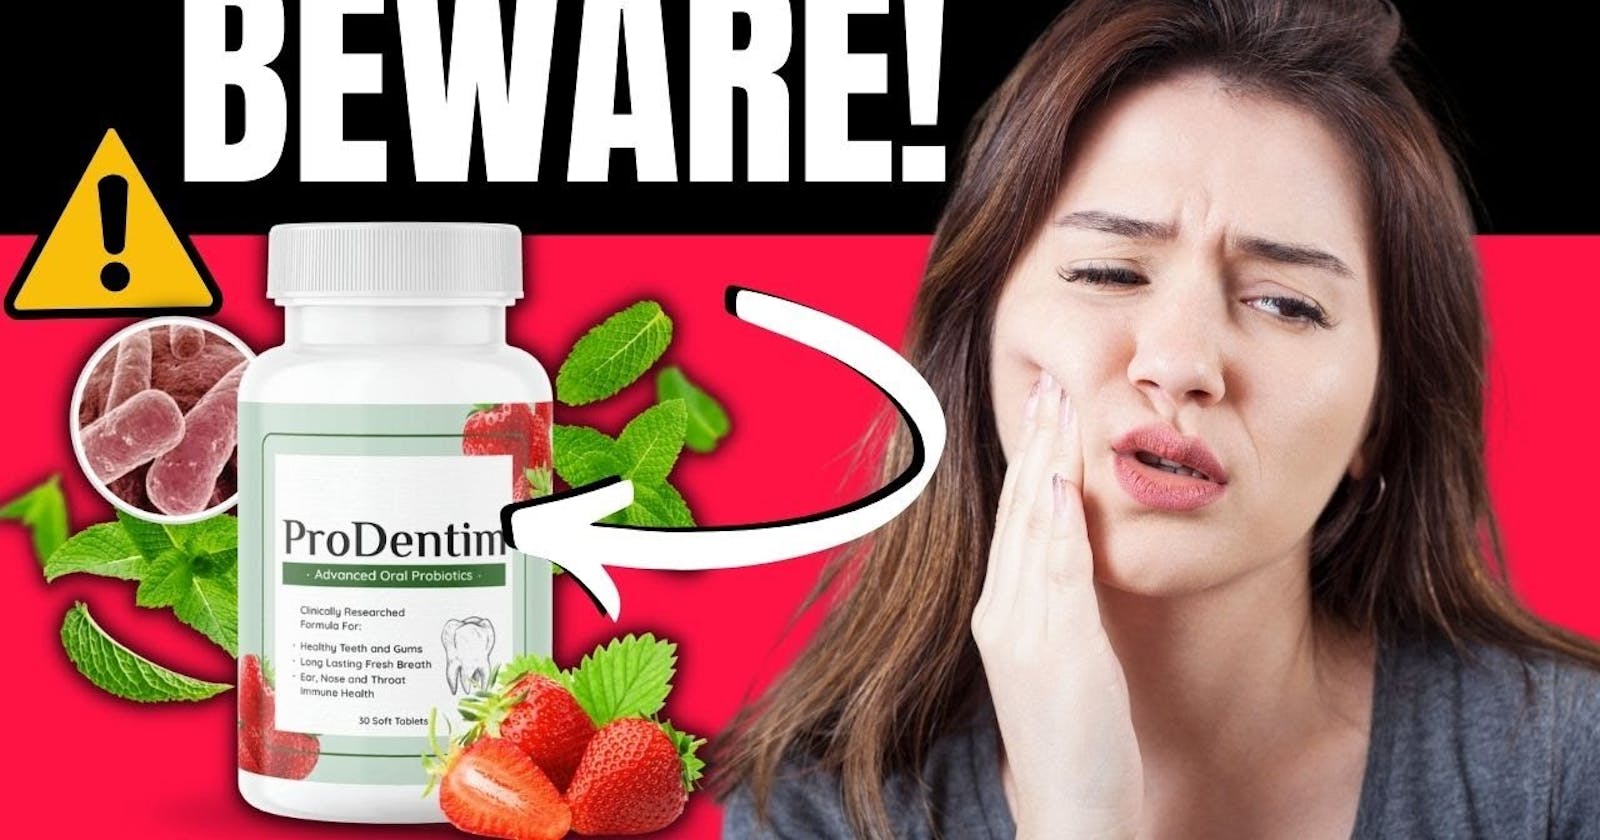 ProDentim Reviews: High-Quality Ingredients | Teeth Health Pills, Order Now!